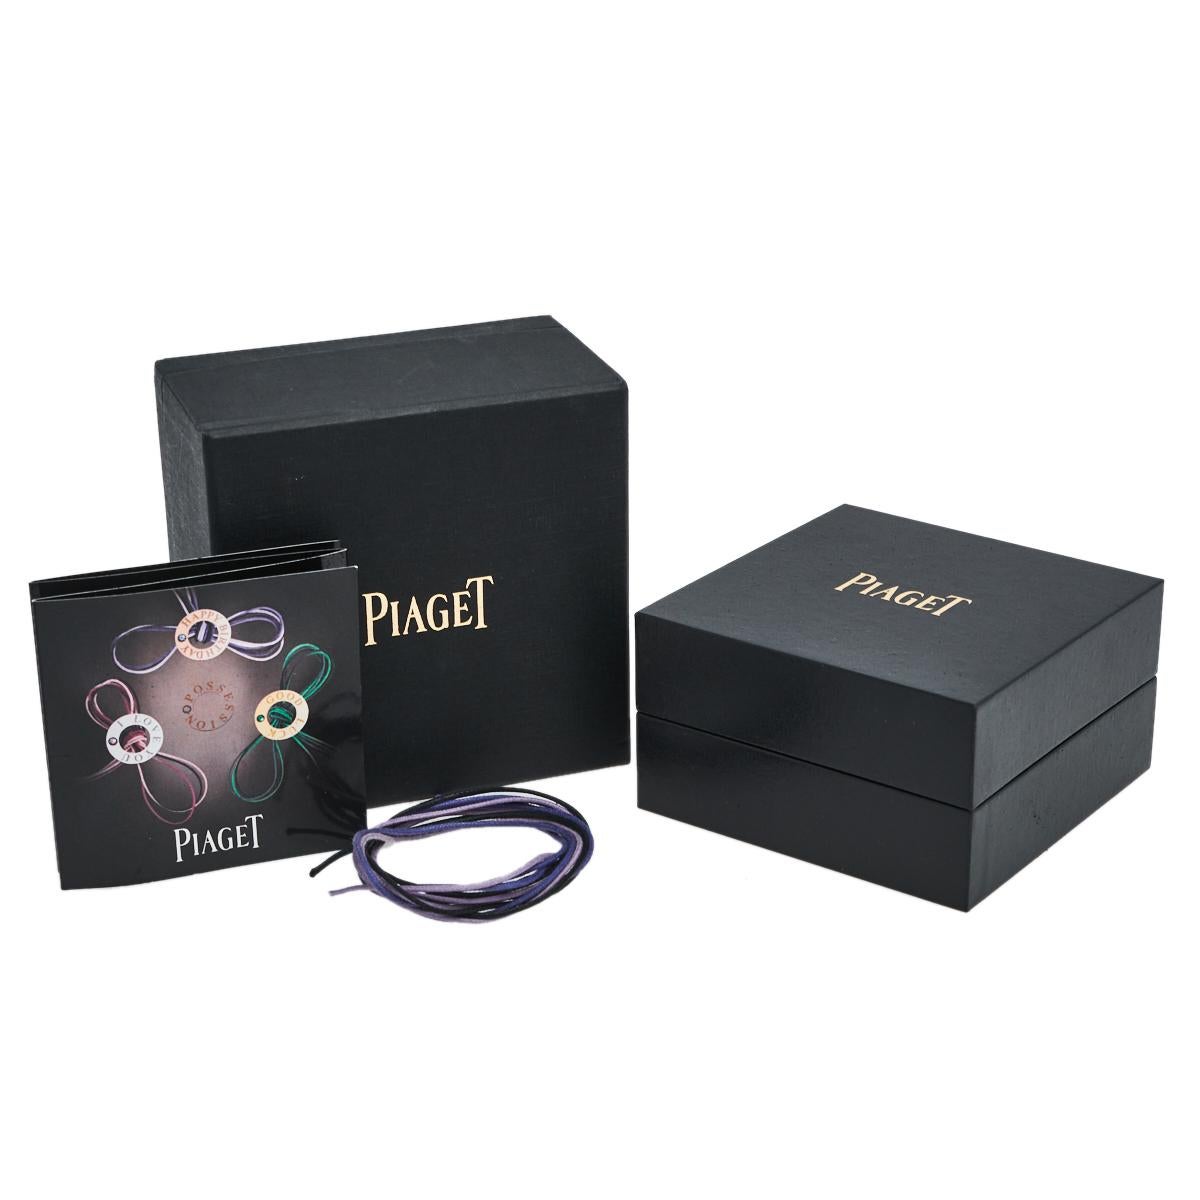 Show your love for fine artistry and luxury accessories with this stunning creation from Piaget that is made from 18k rose gold. One of the most popular collections from Piaget is their Possession collection. The ring-shaped pendant has one side